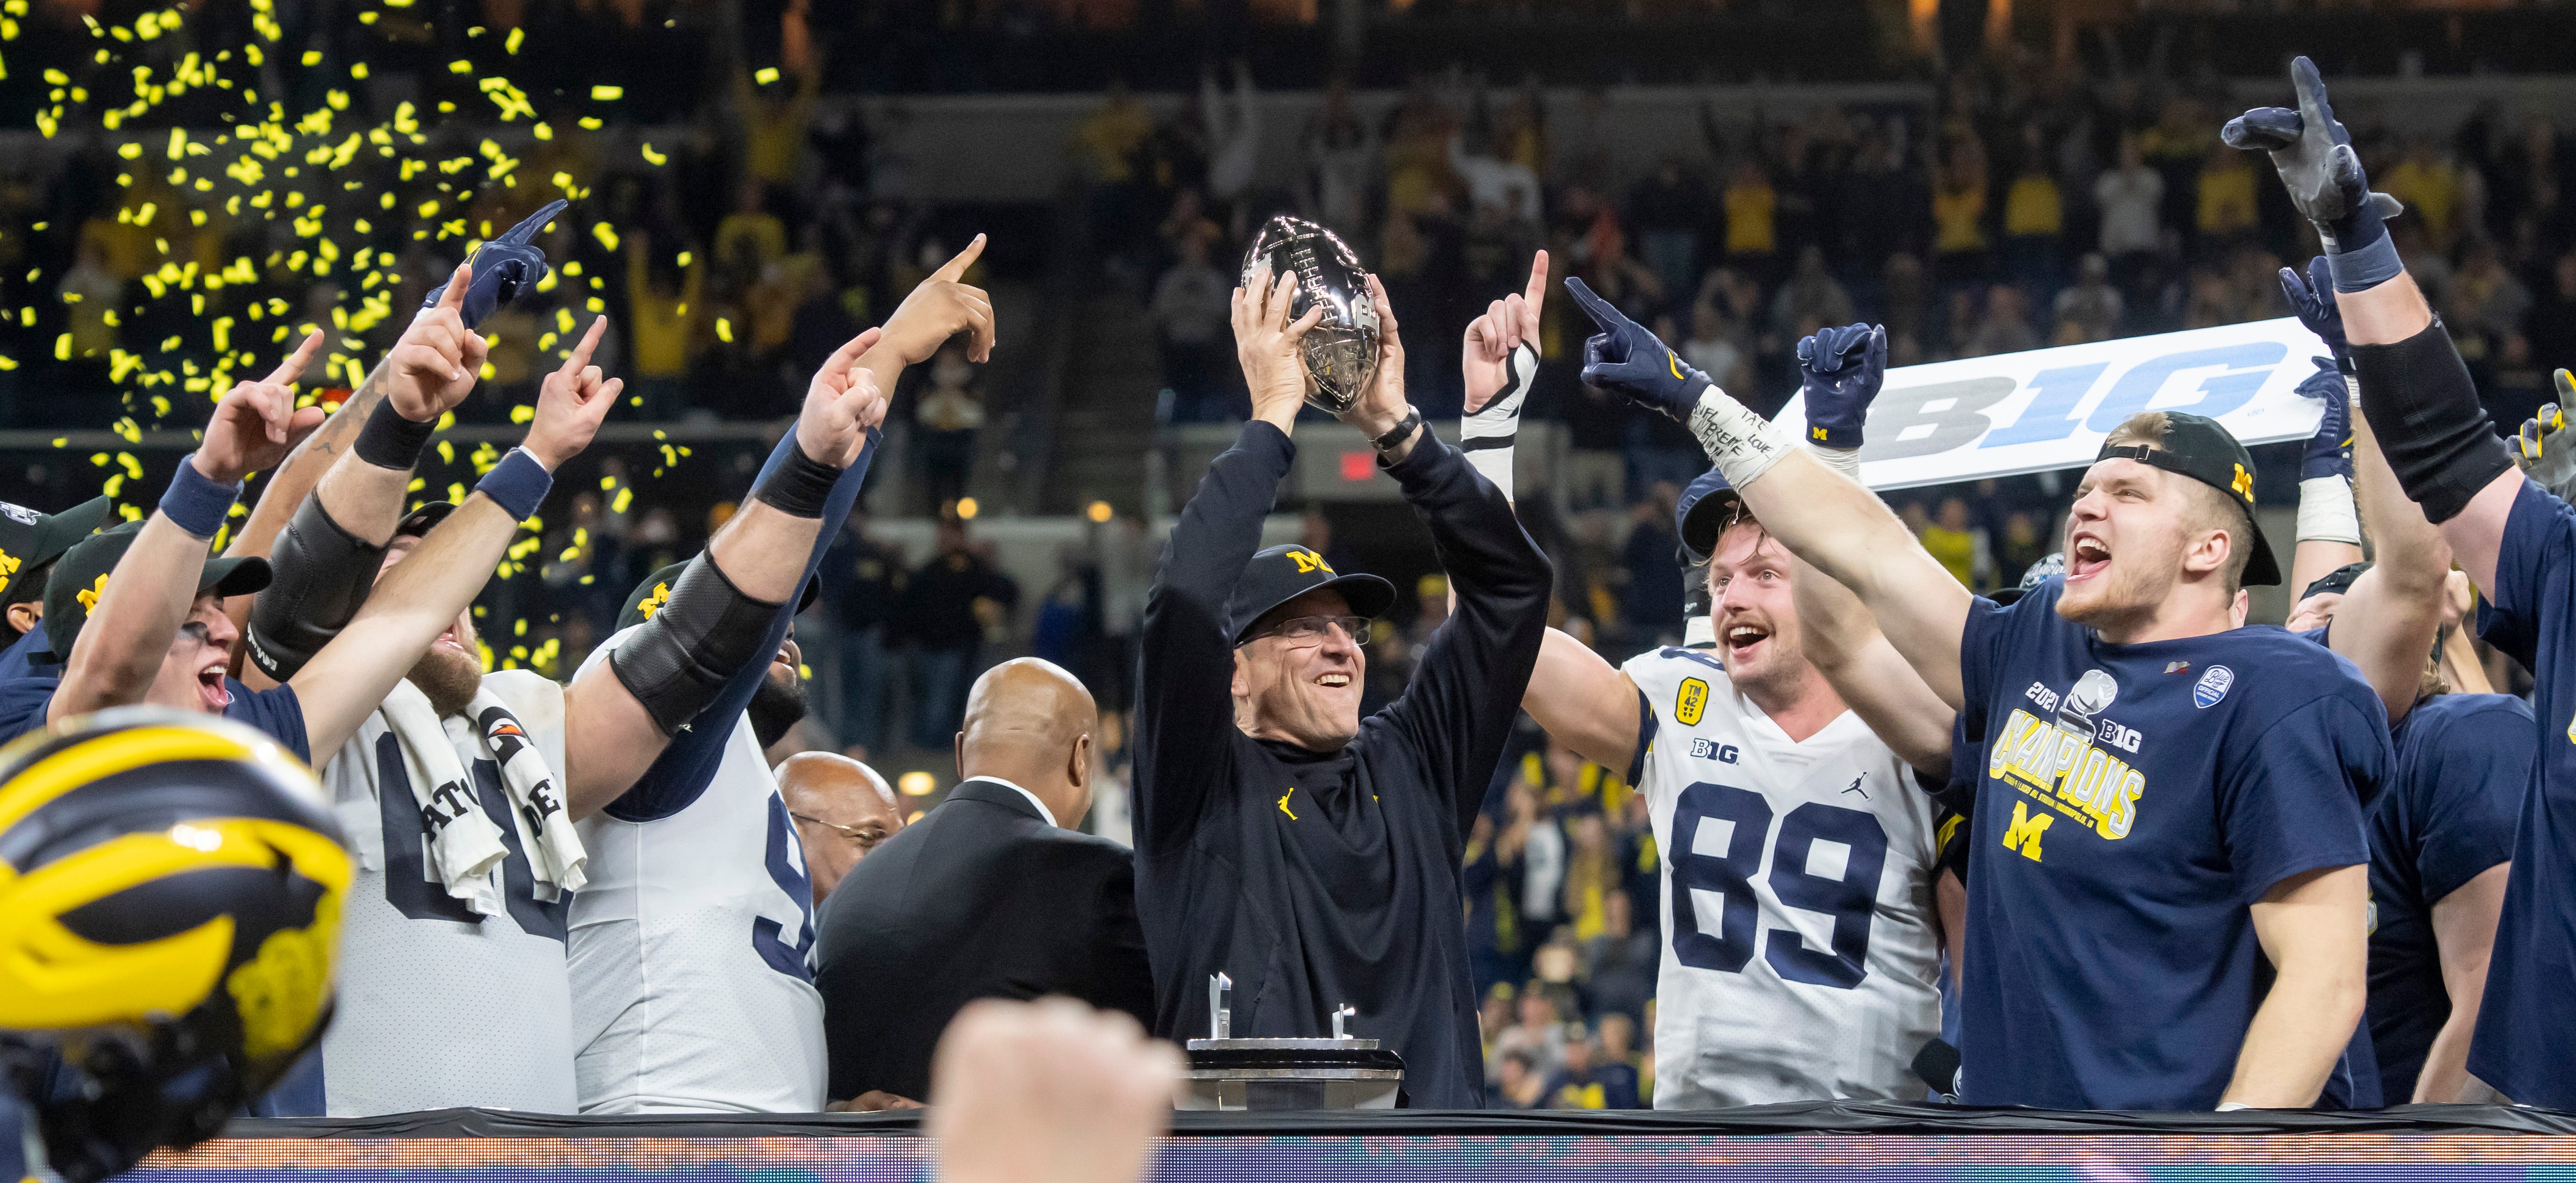 Head coach Jim Harbaugh holds up the championship trophy after the University of Michigan defeated the University of Iowa 42-3 to win the Big Ten championship.